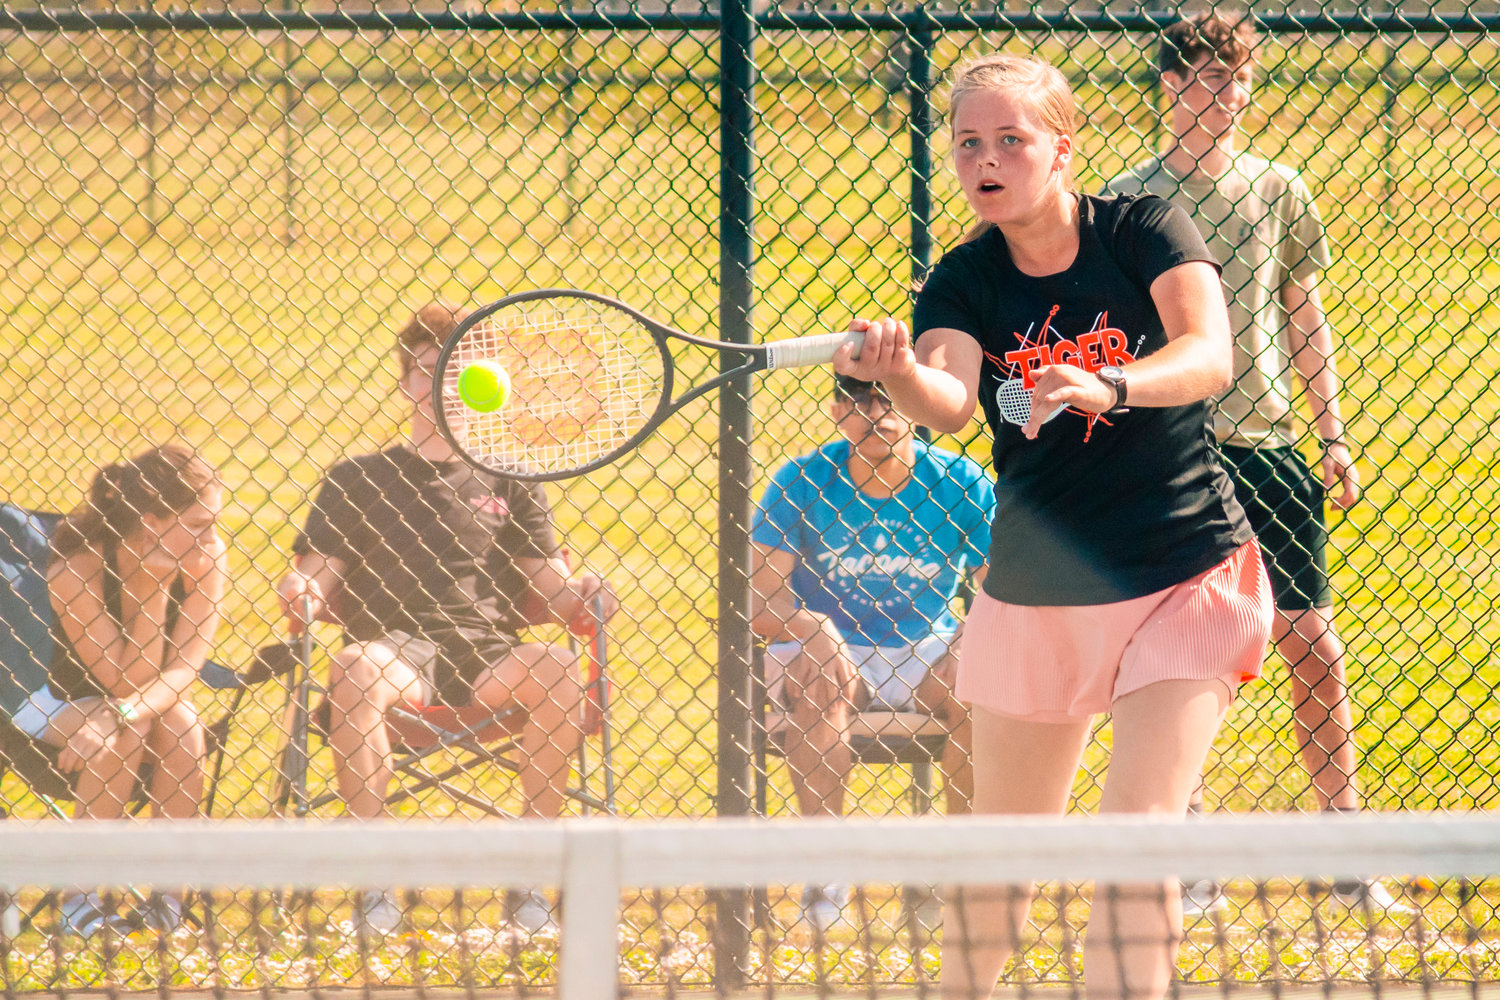 Centralia’s Olivia Wiley hits the tennis ball during a match against Tumwater Wednesday afternoon.